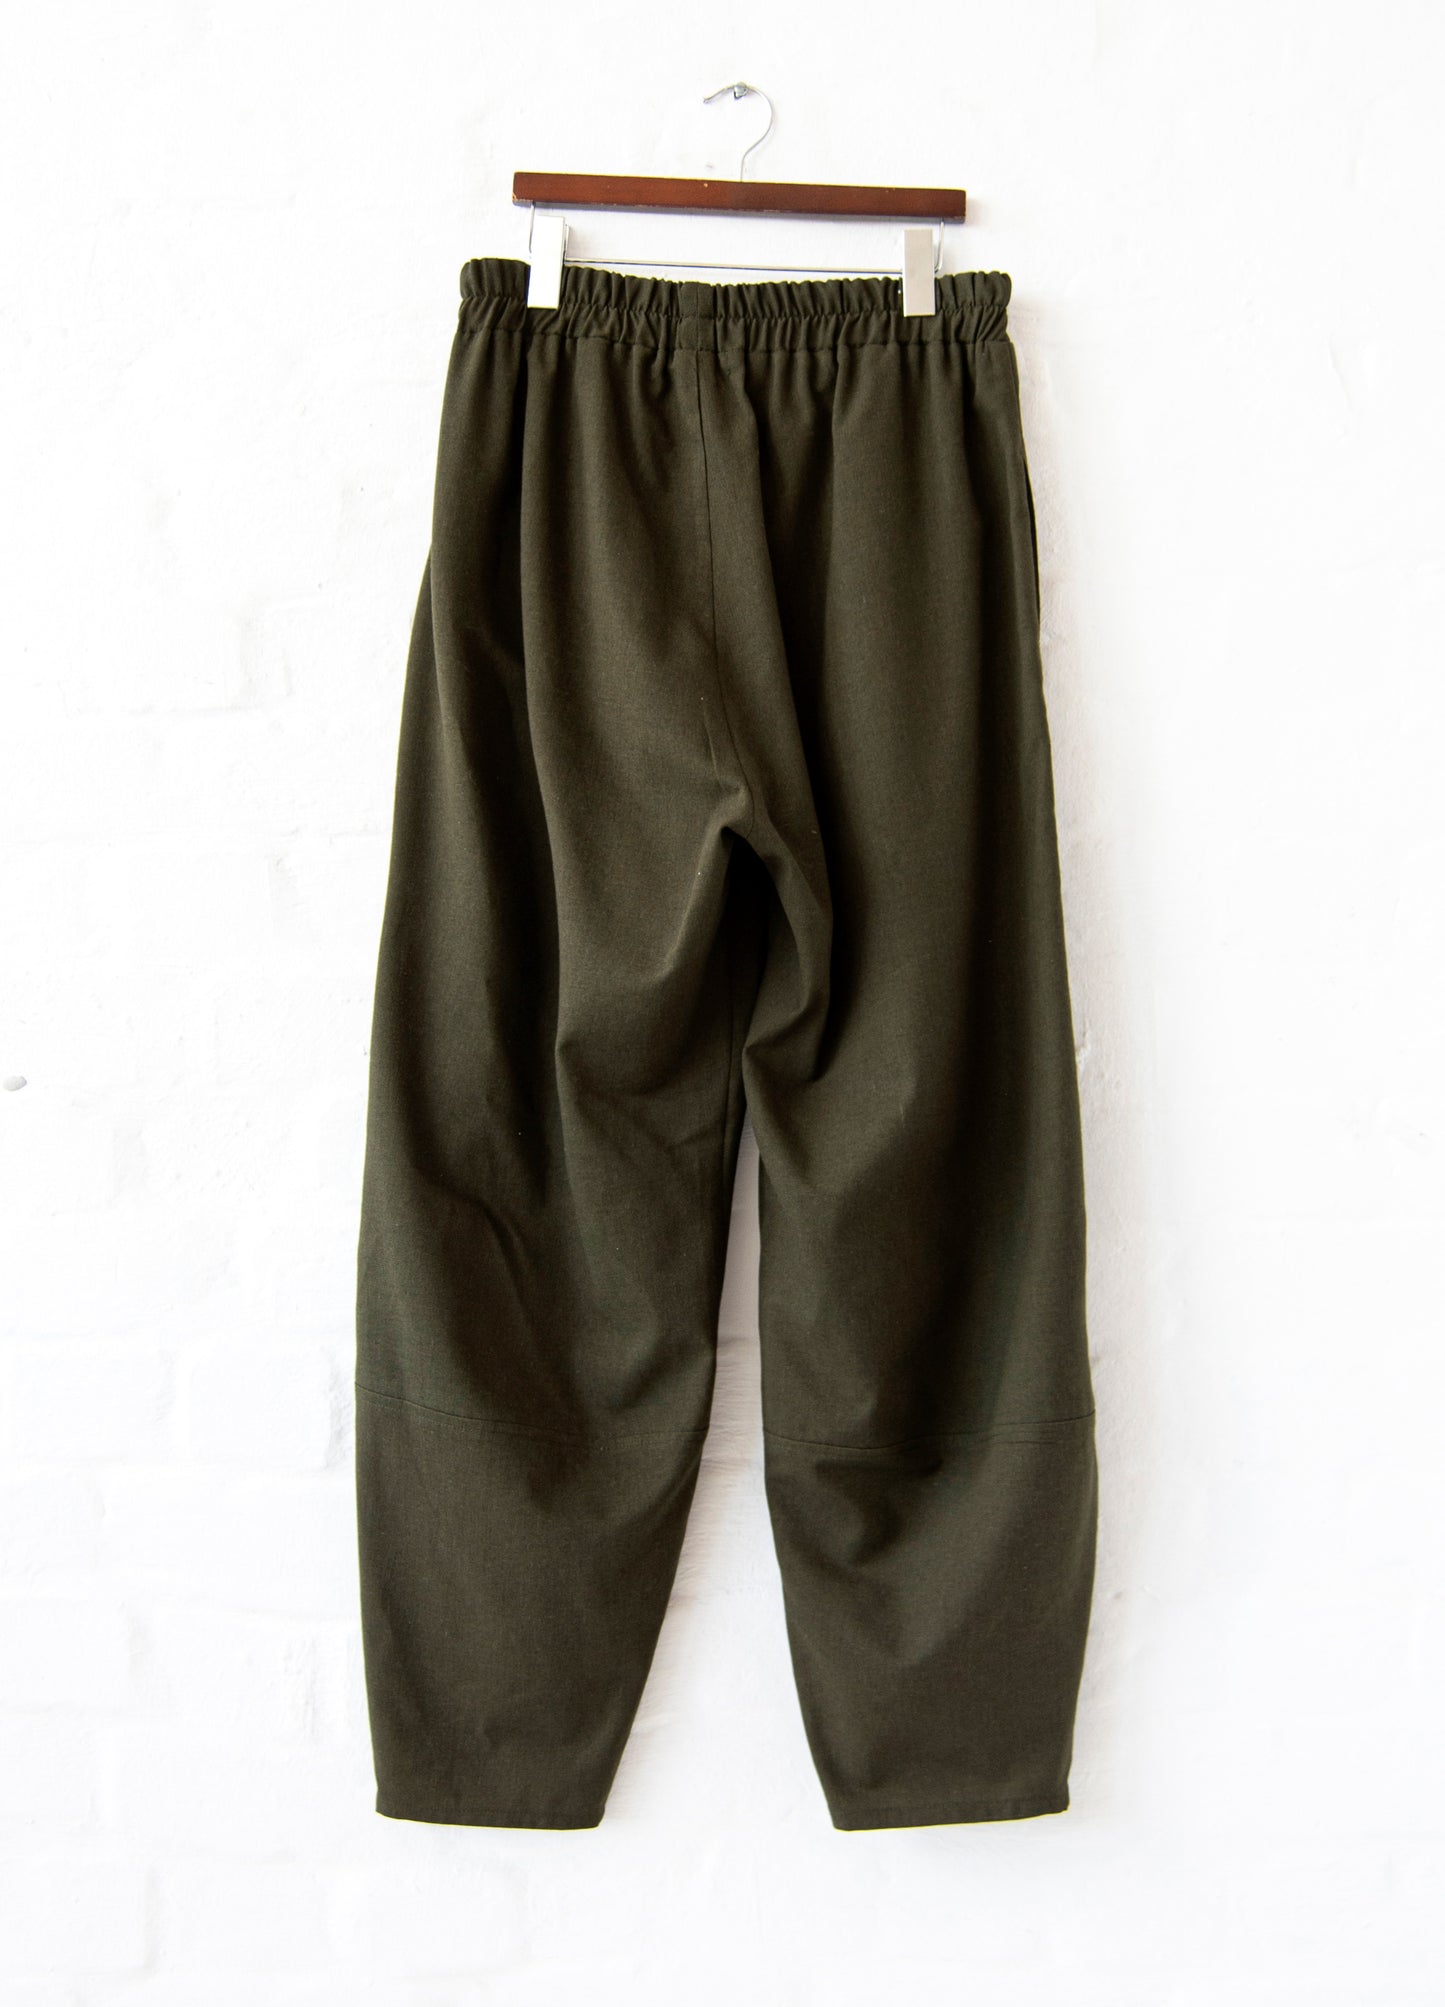 Sophie Lantern Trousers in Military